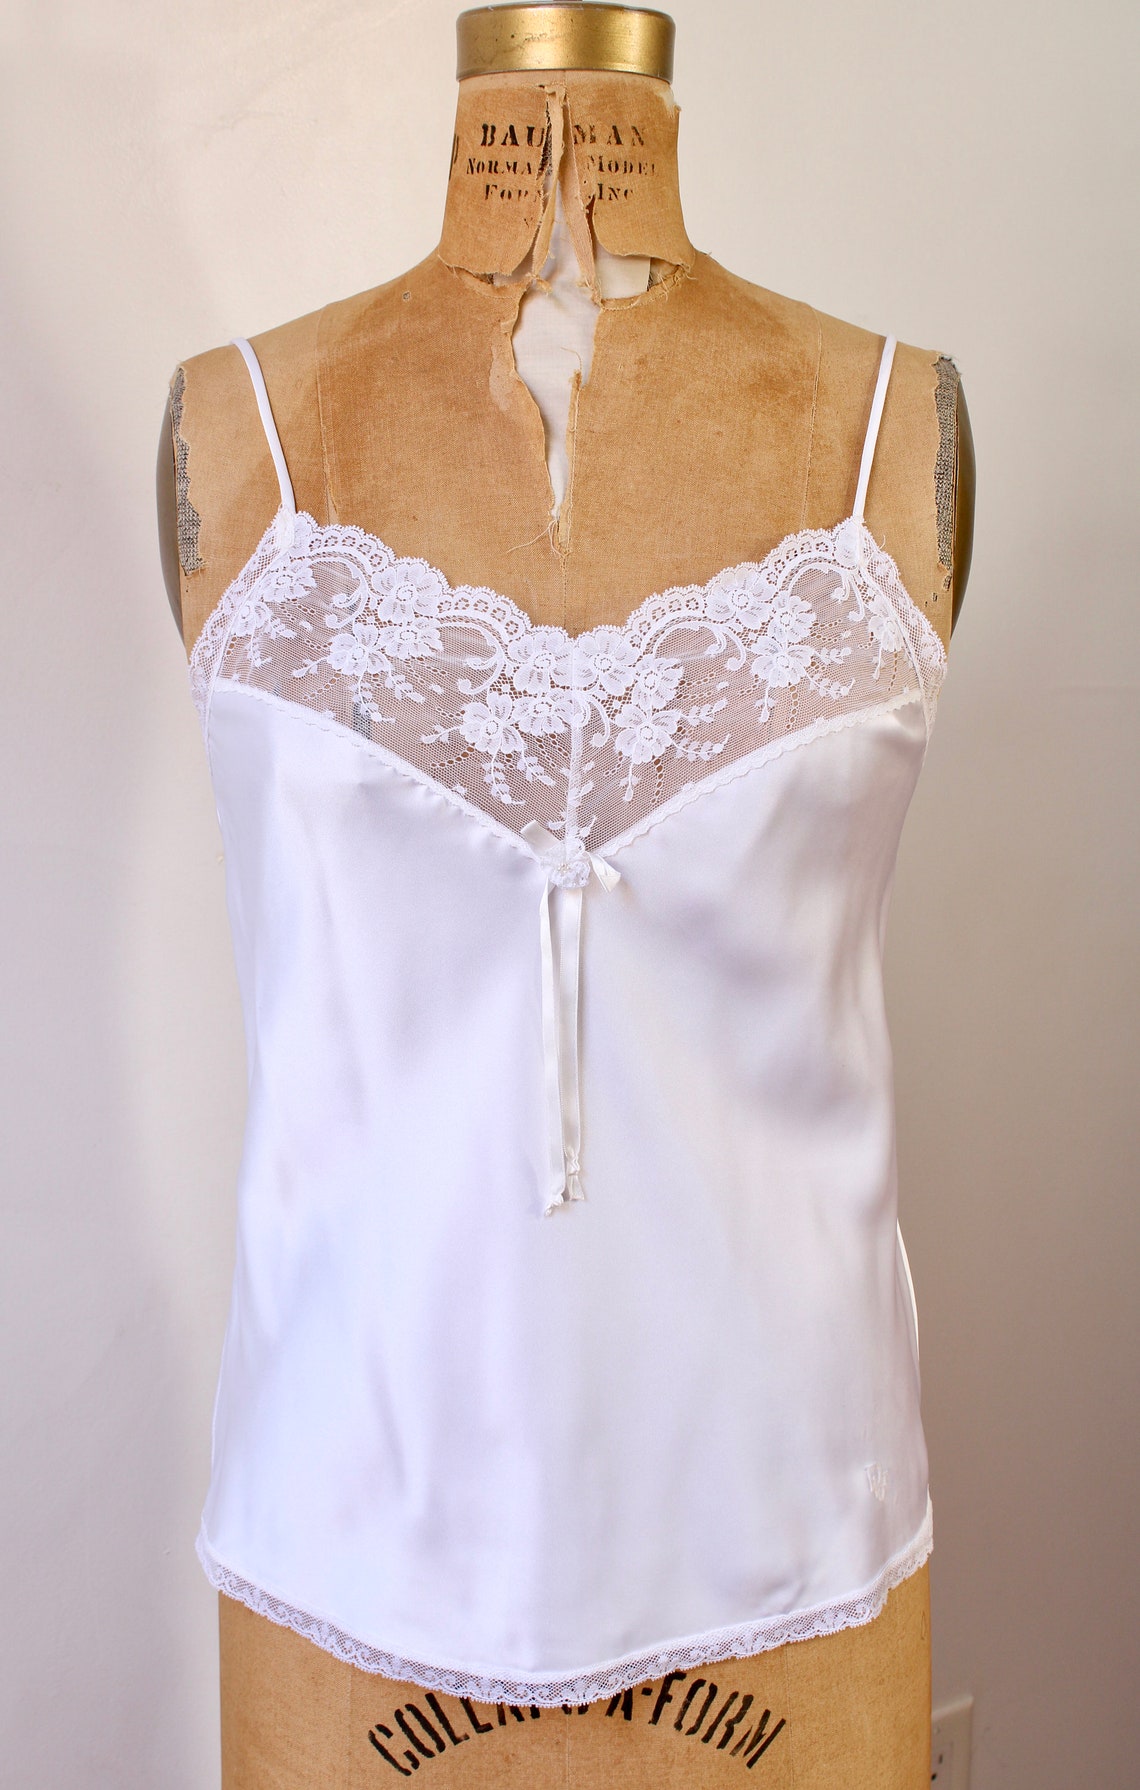 Christian Dior Camisole Lingerie Top / White Satin with Lace | Etsy